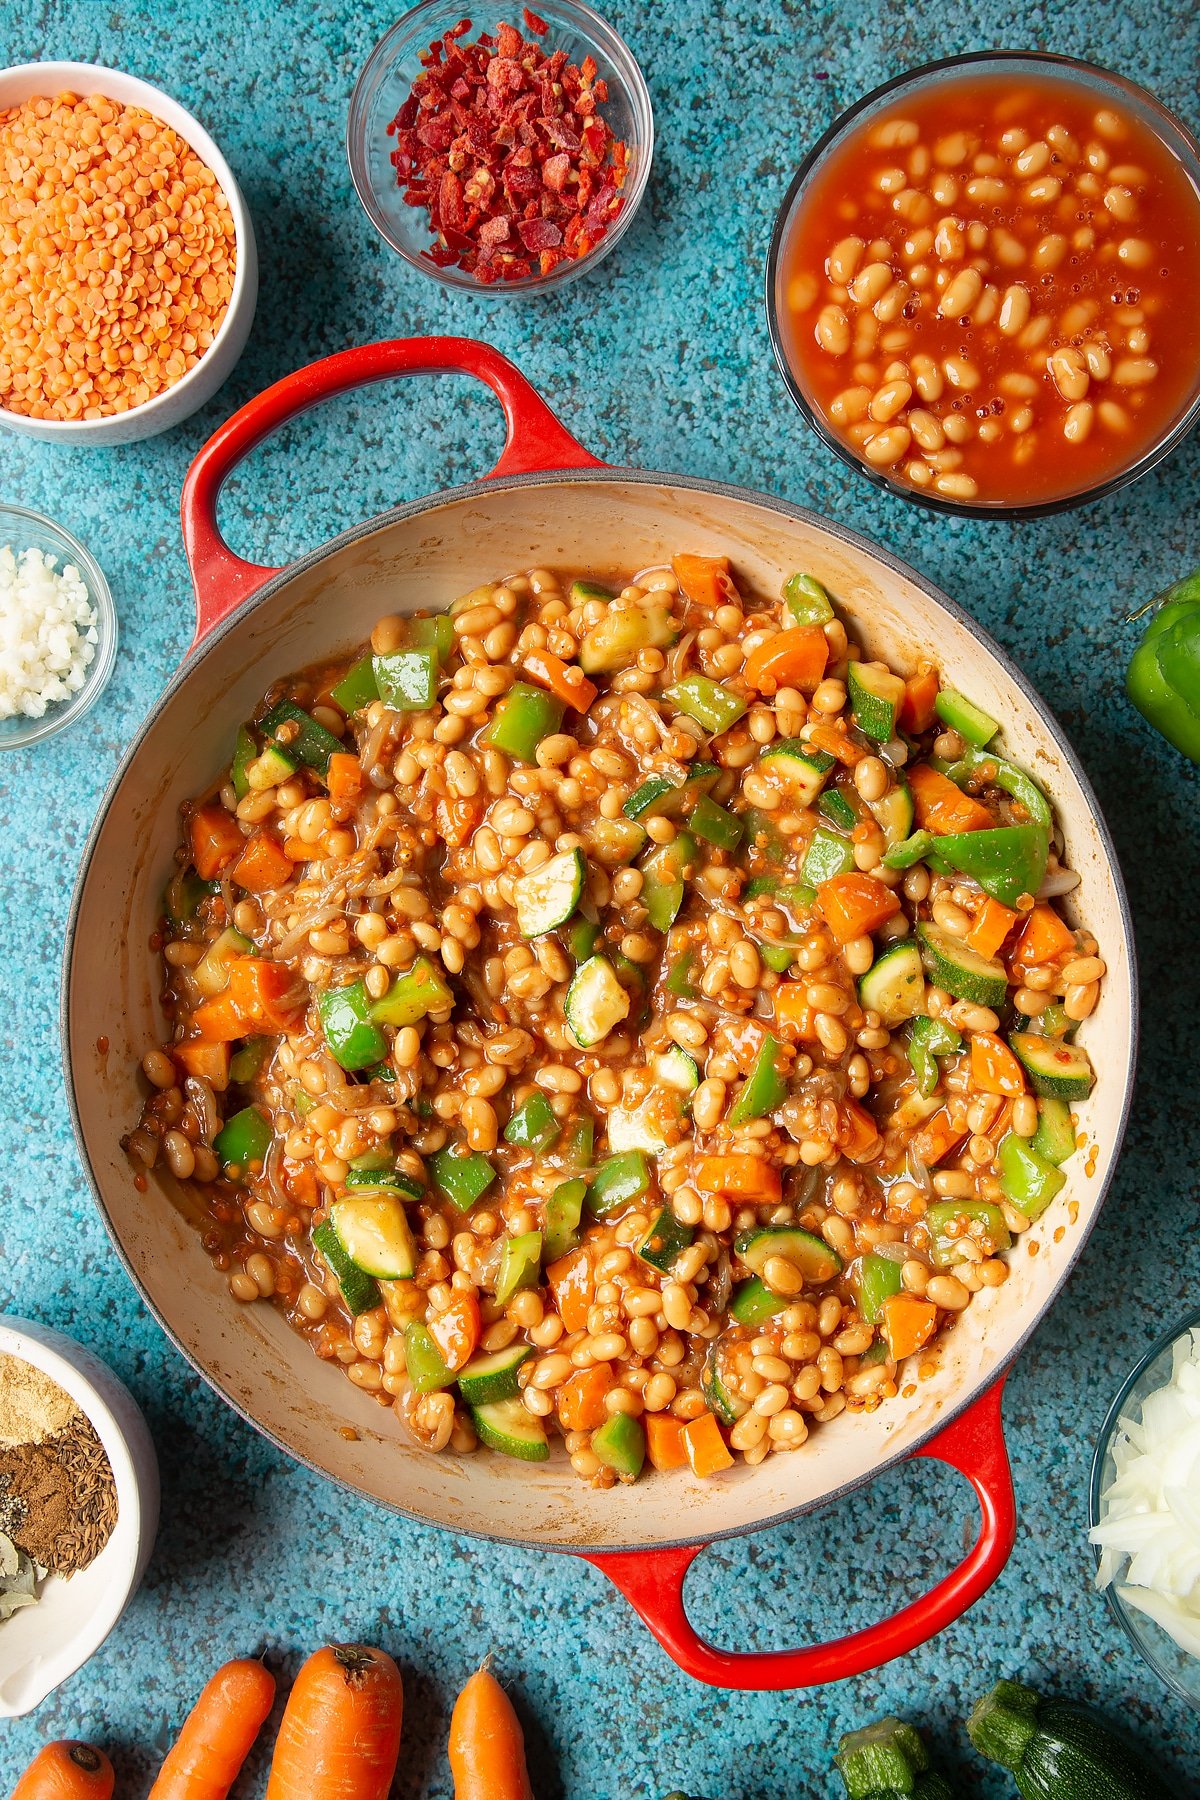 Fried onions, spices, peppers, carrots, courgette, red lentils and baked beans in a pan. Ingredients to make baked bean curry surround the pen.